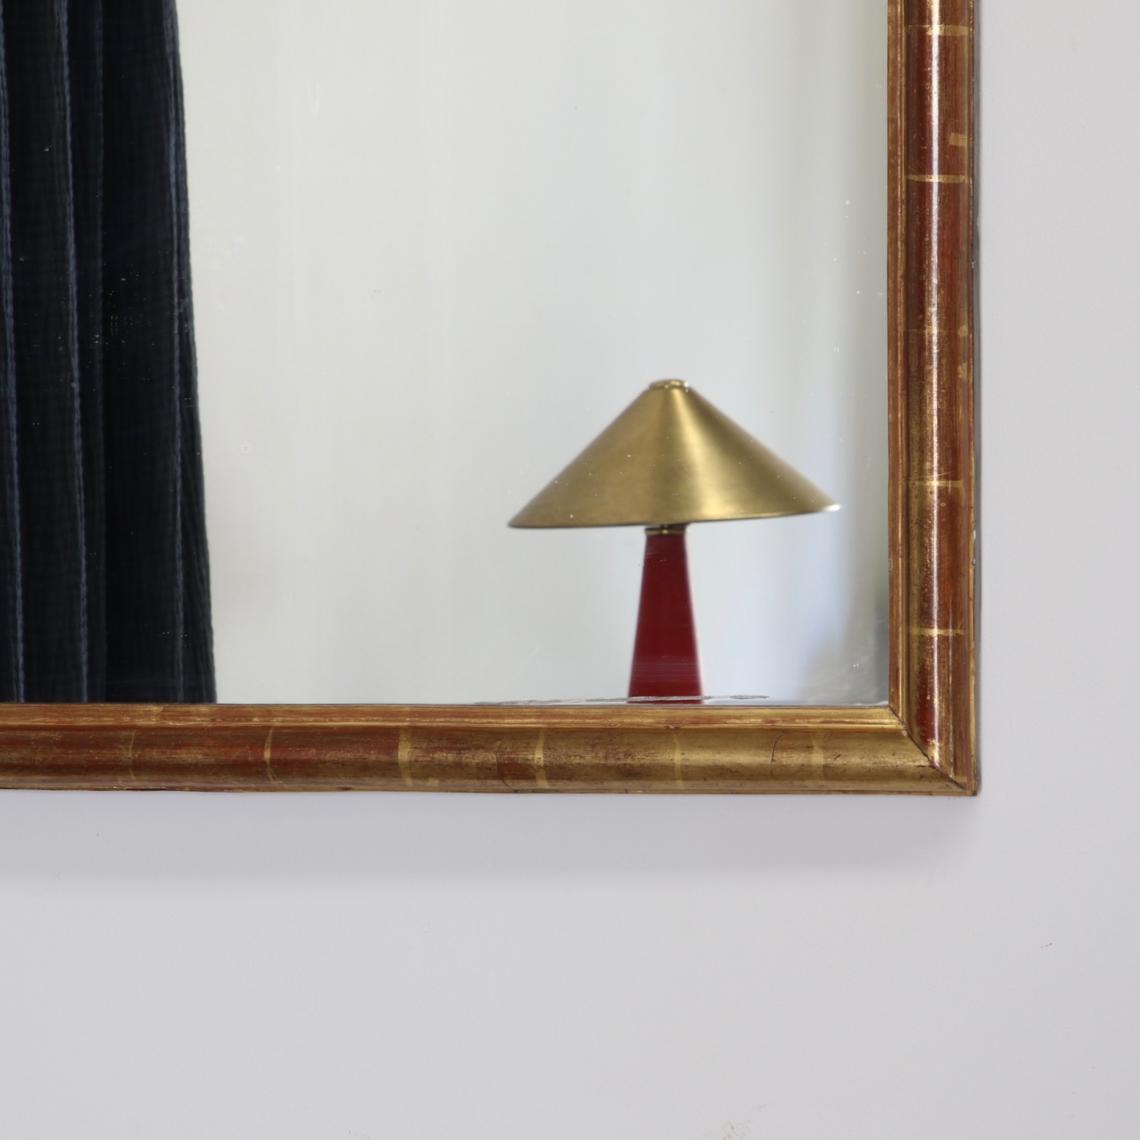 Water gilded Mirror